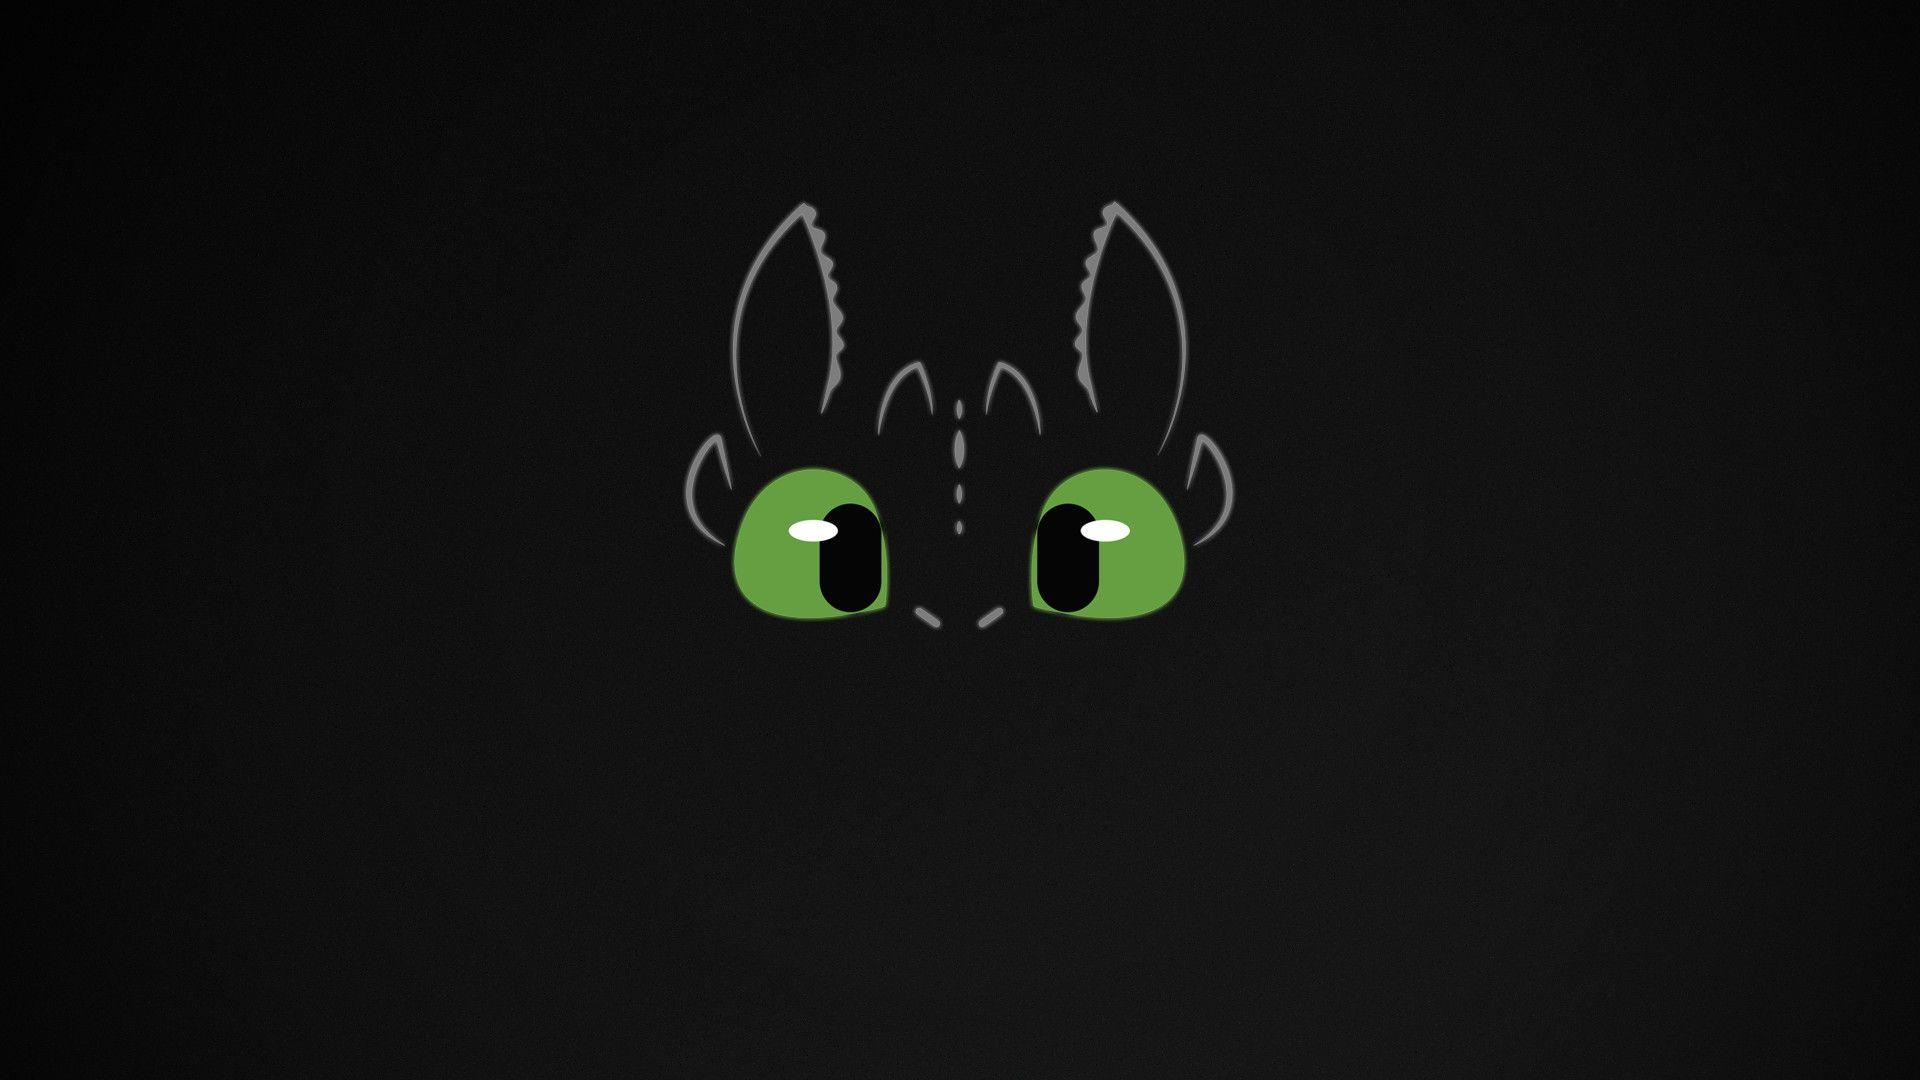 Toothless the Dragon Wallpaper